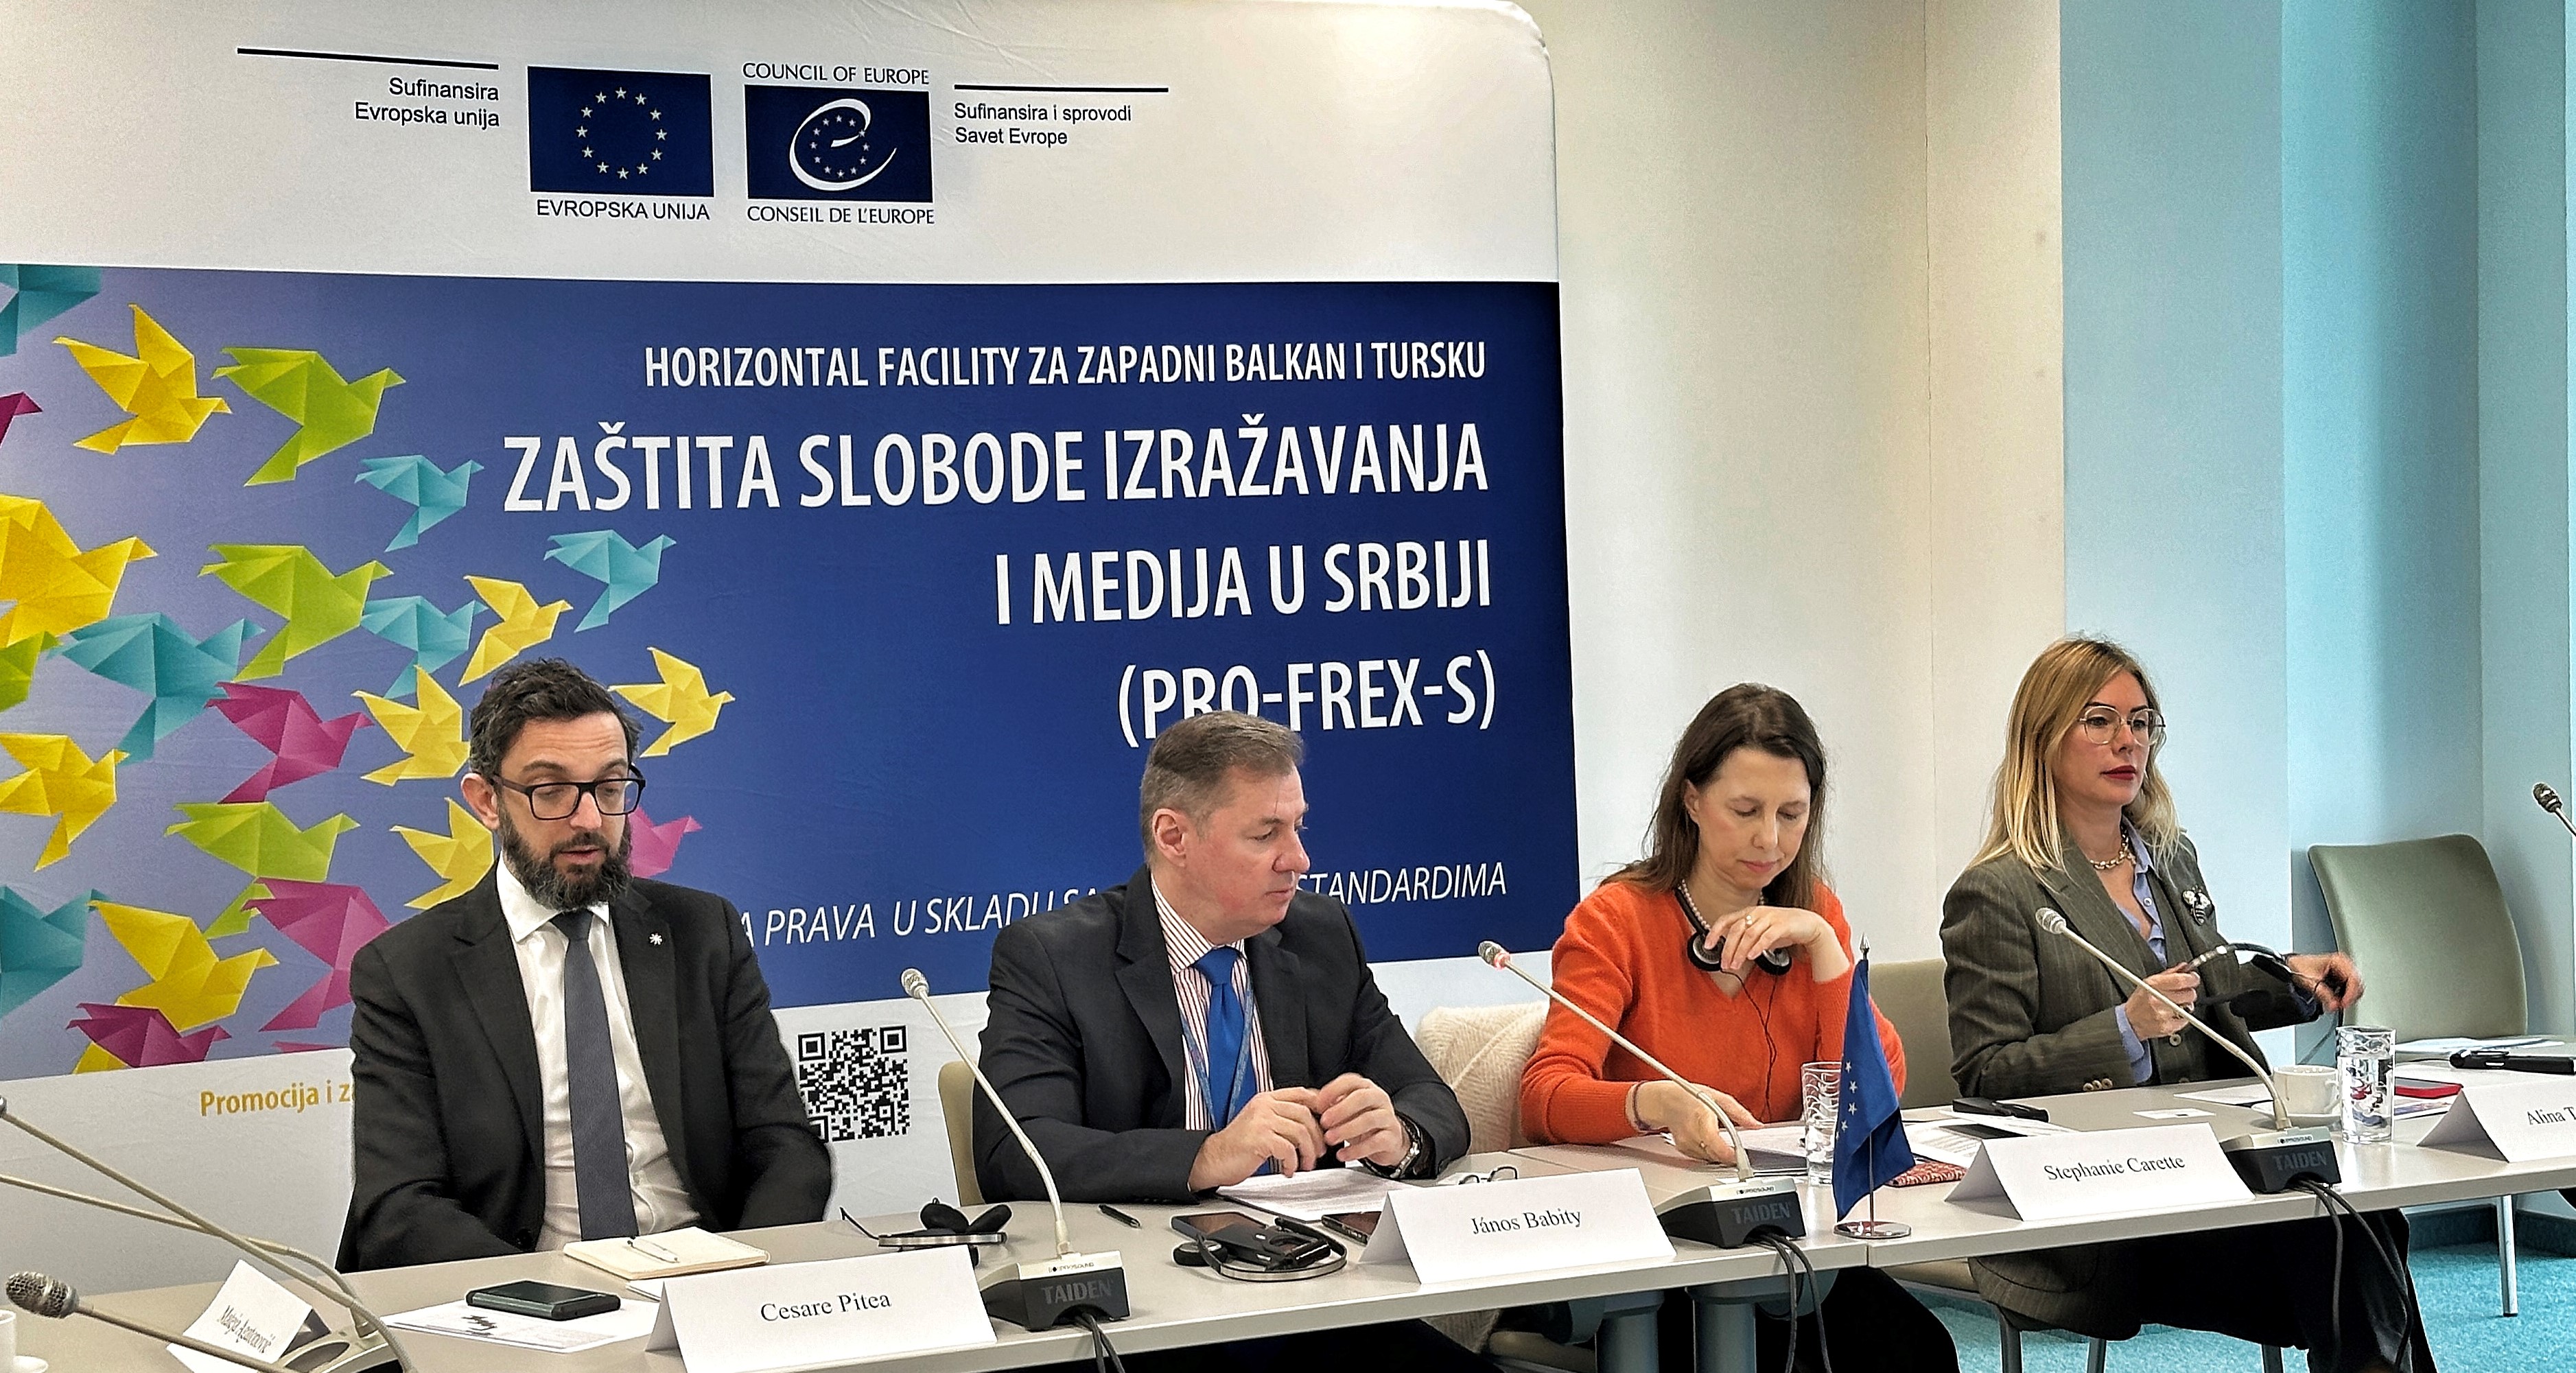 Access to information, regulation of electronic media, and safety of journalists to be addressed by the action in Serbia